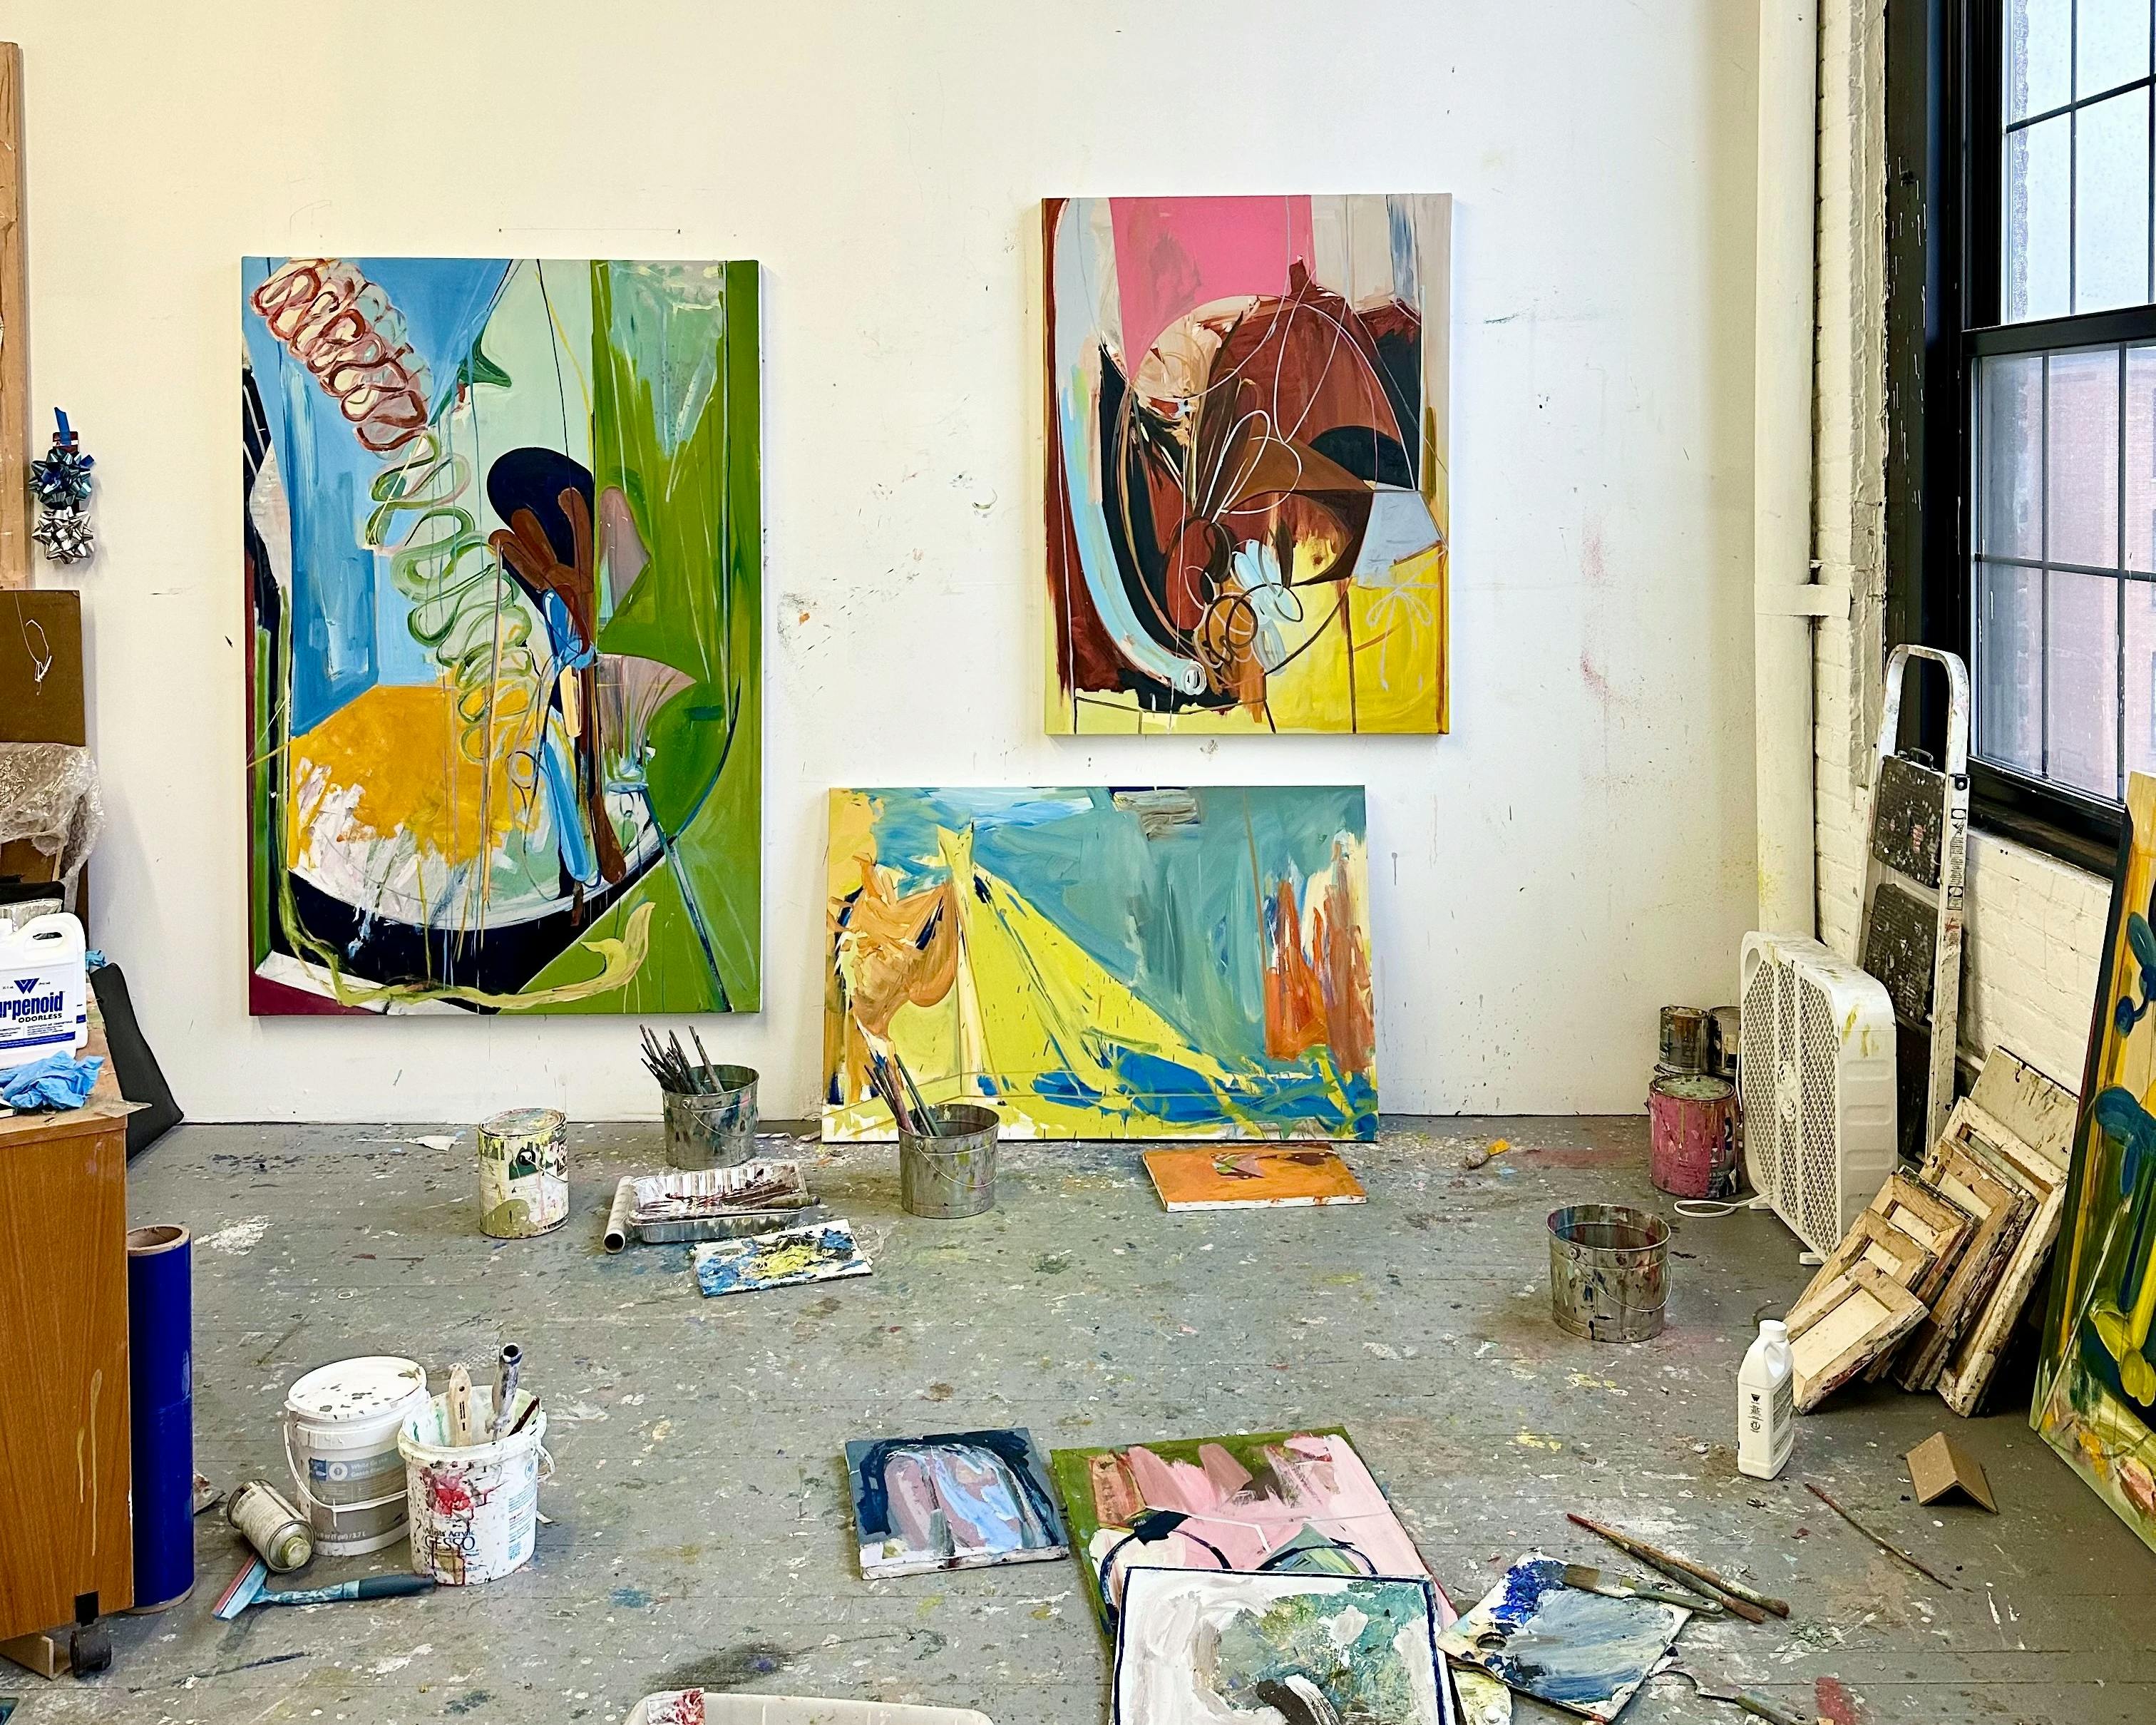 Abstract, colorful paintings installed on a white wall in artist Diana Delgado's studio.